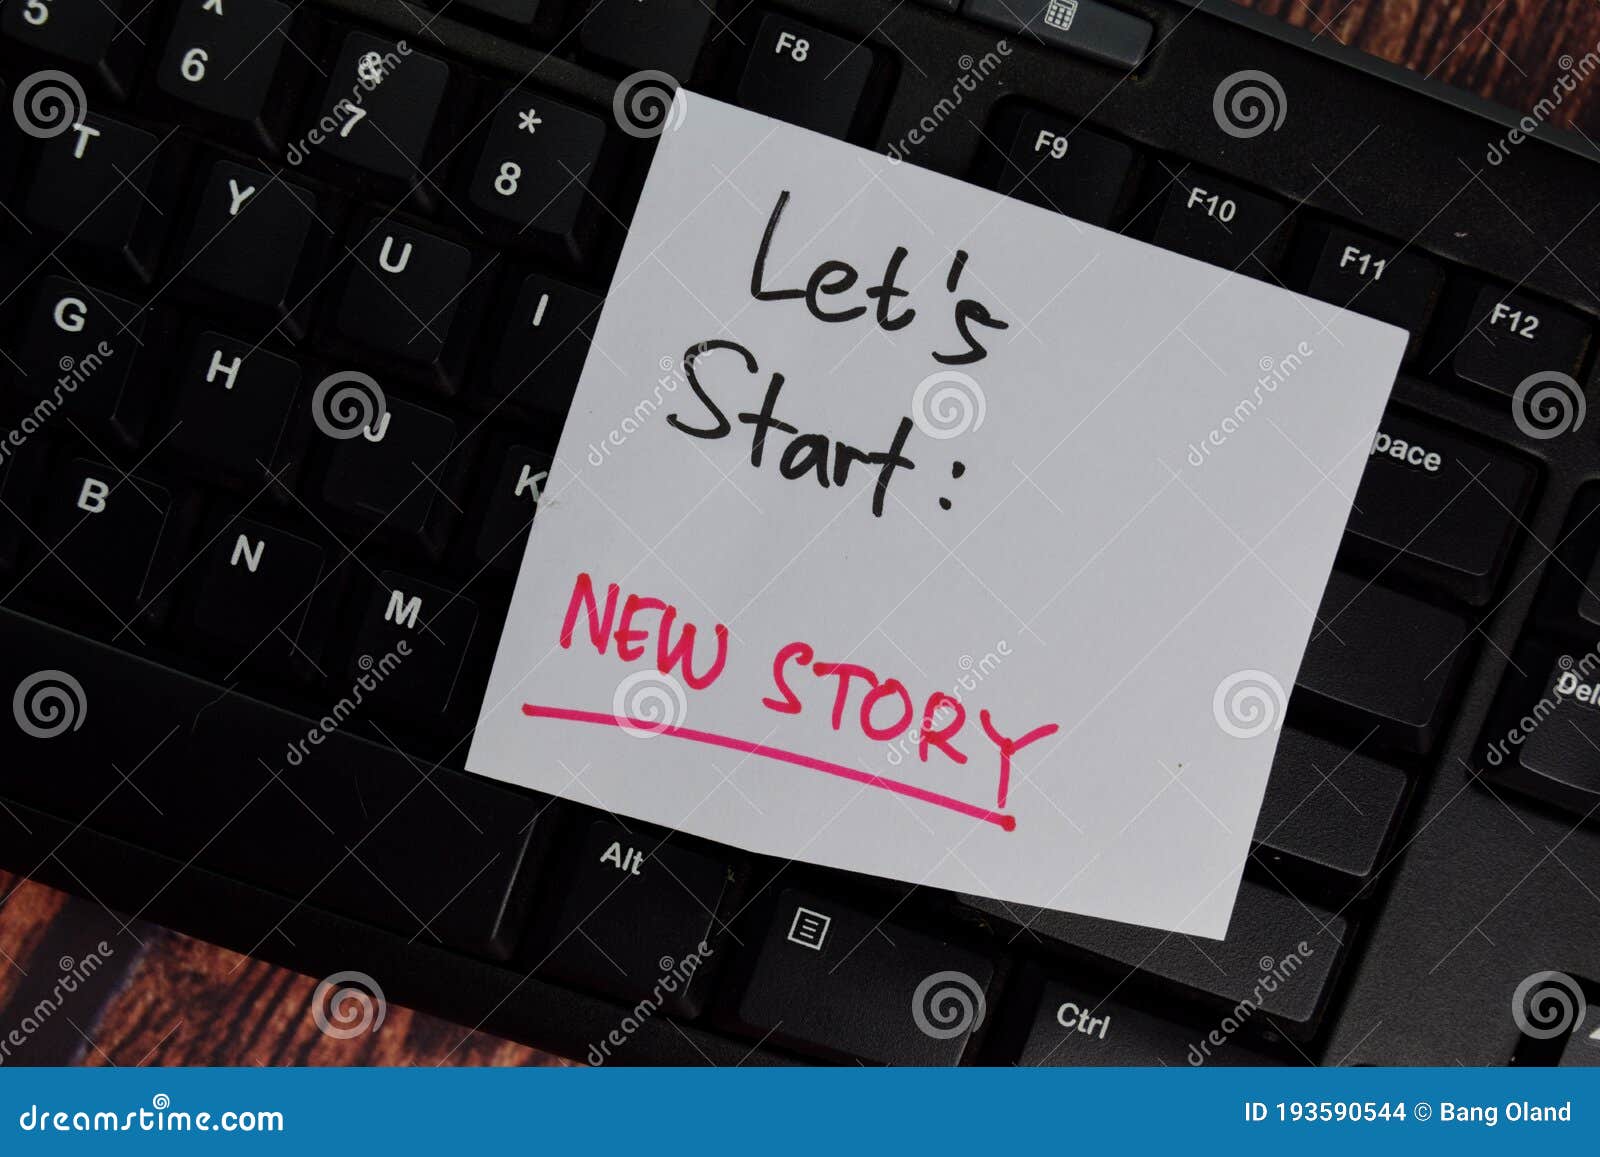 let`s start - new story text on sticky notes with office desk